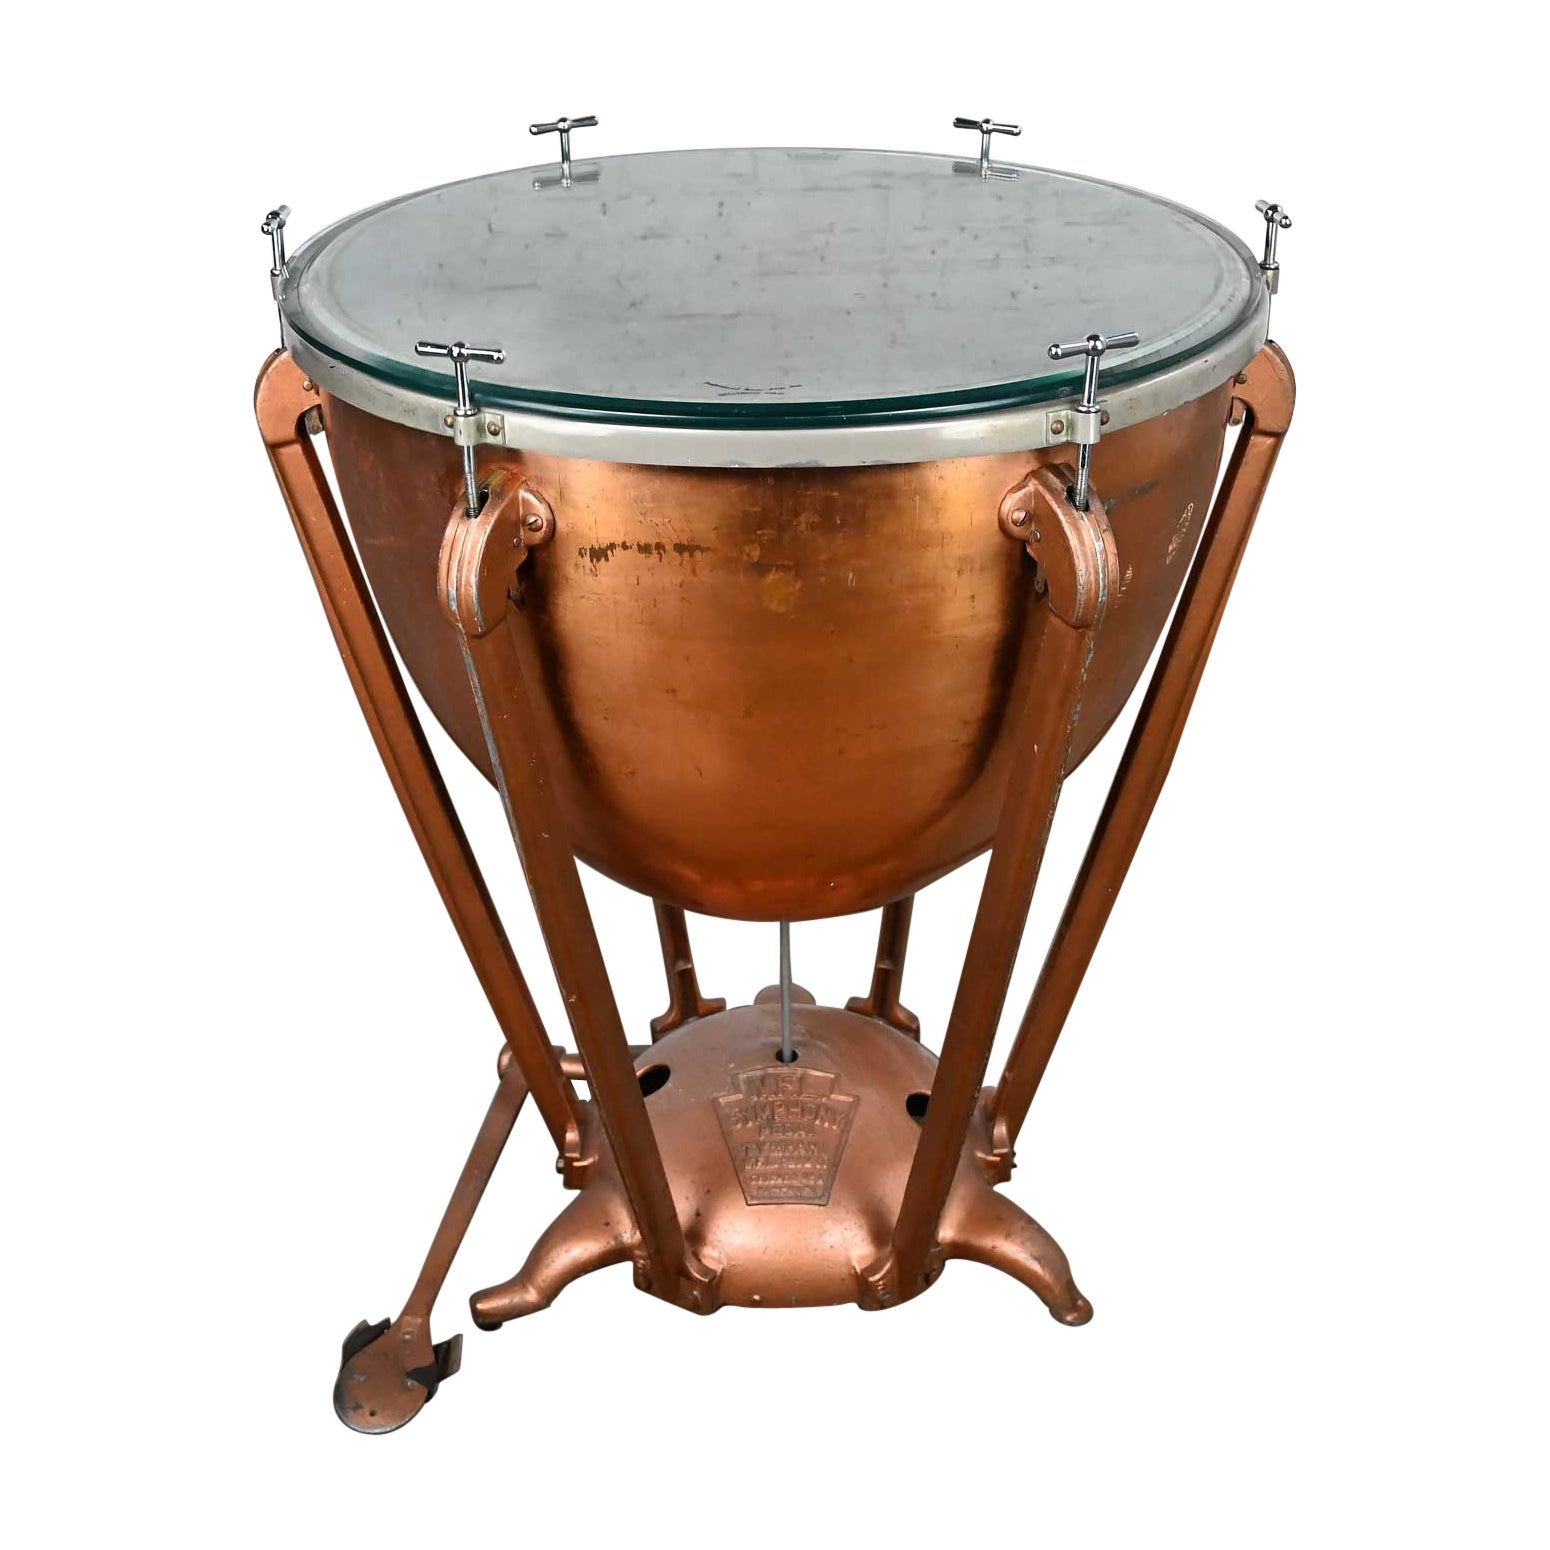 Steampunk Industrial Copper Timpani Kettle Drum Center Table by WFL Drum Co  For Sale